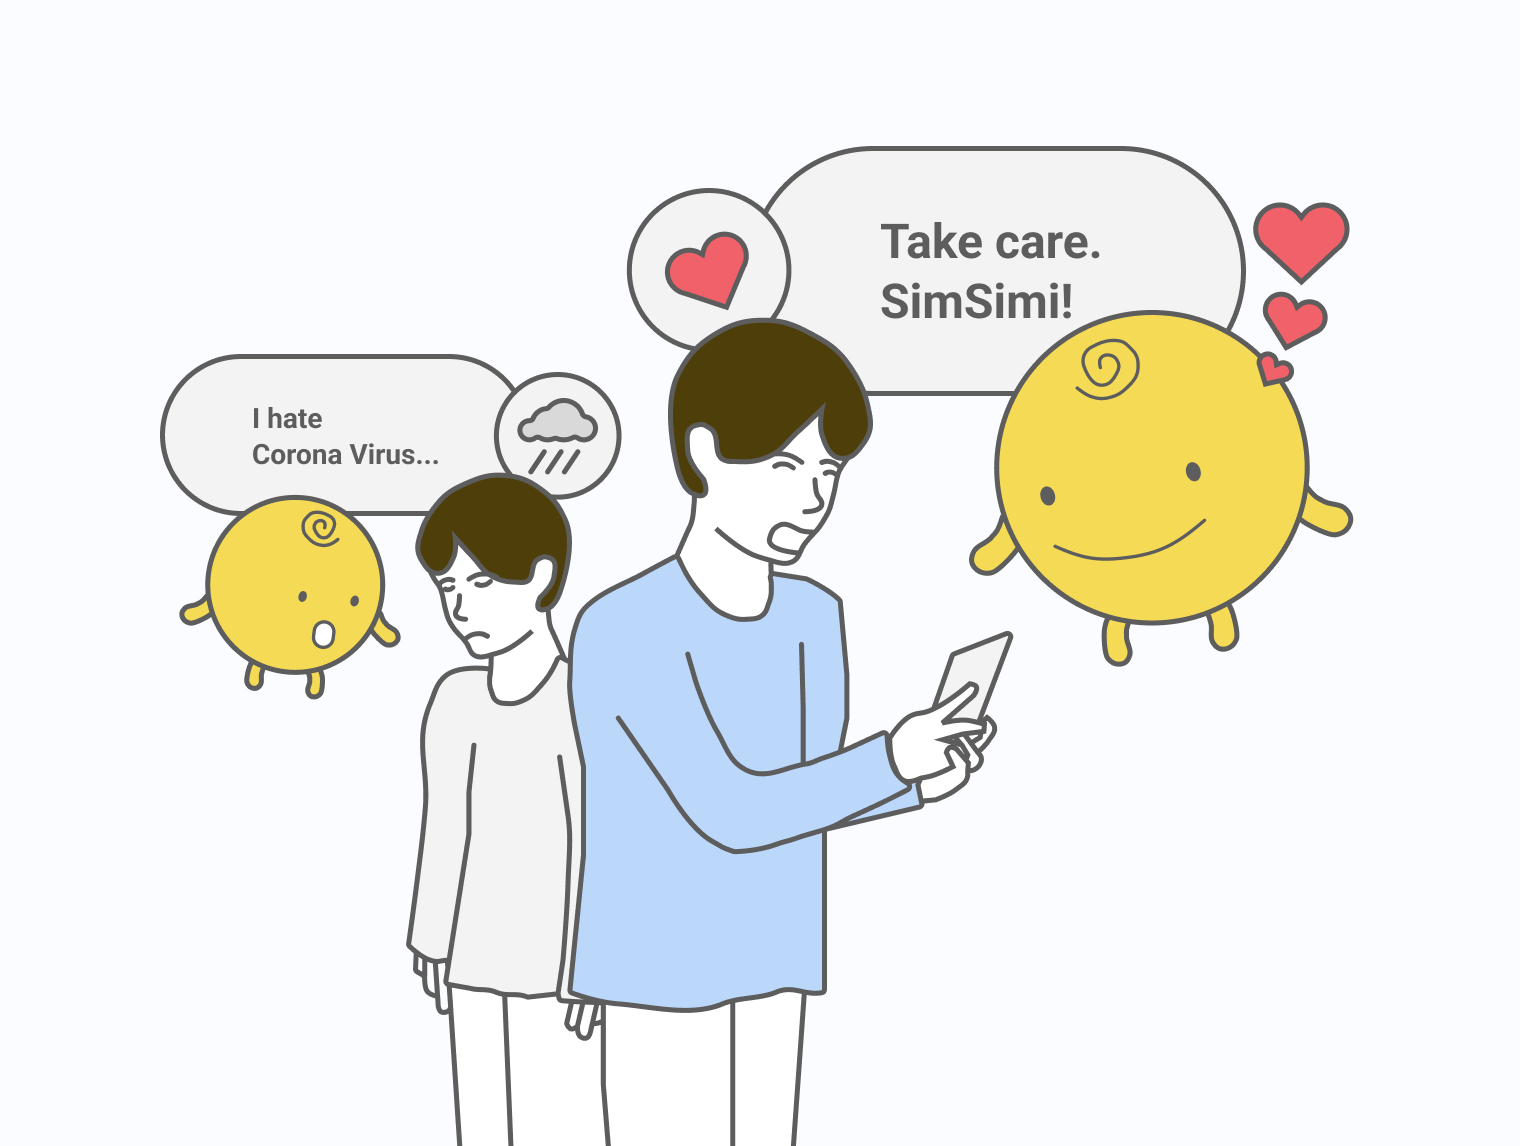 Figure 3. During the Covid-19 pandemic, users sought health-related information and shared emotional messages with the chatbot, indicating the potential use of chatbots to provide accurate health information and emotional support.